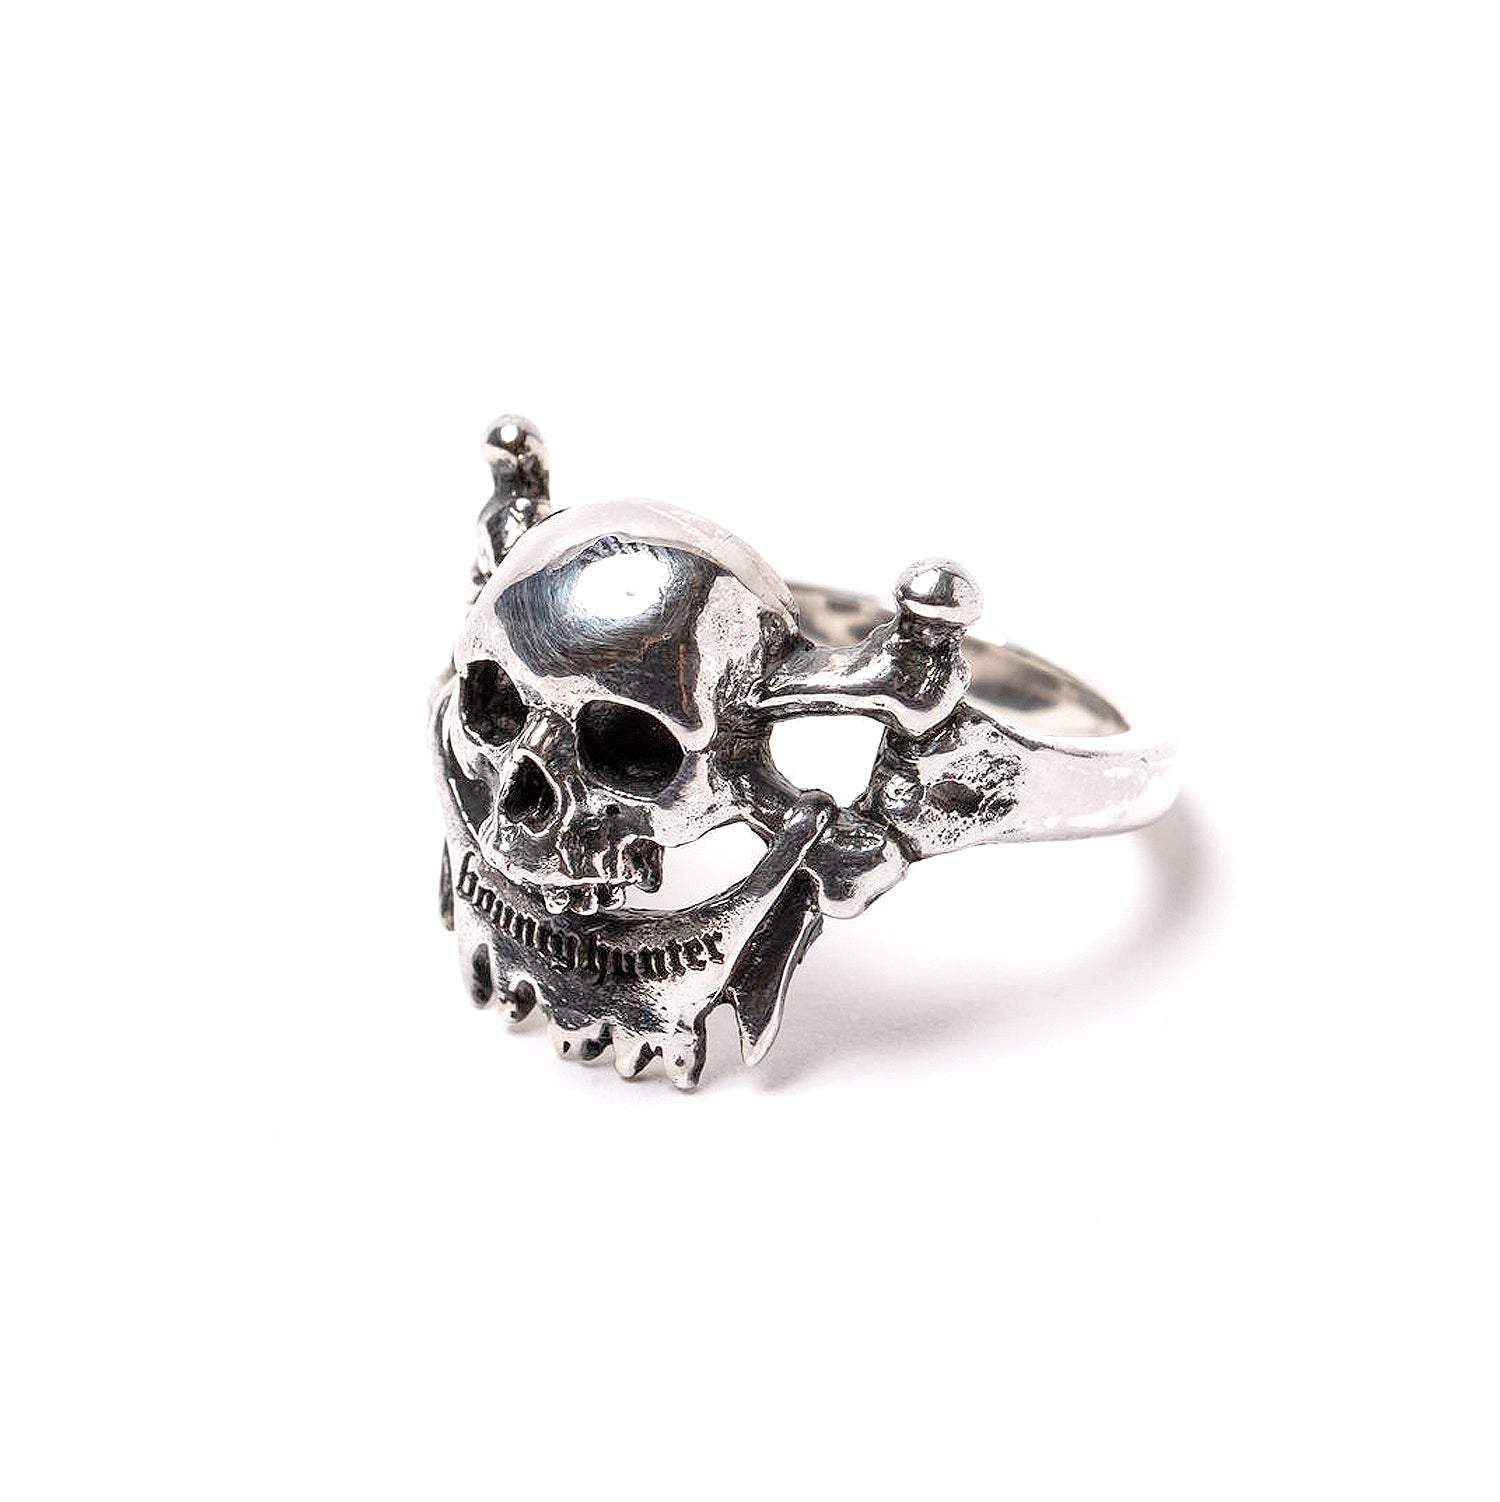 Bounty Hunter x Dog State UK Skull Ring Silver – Laced